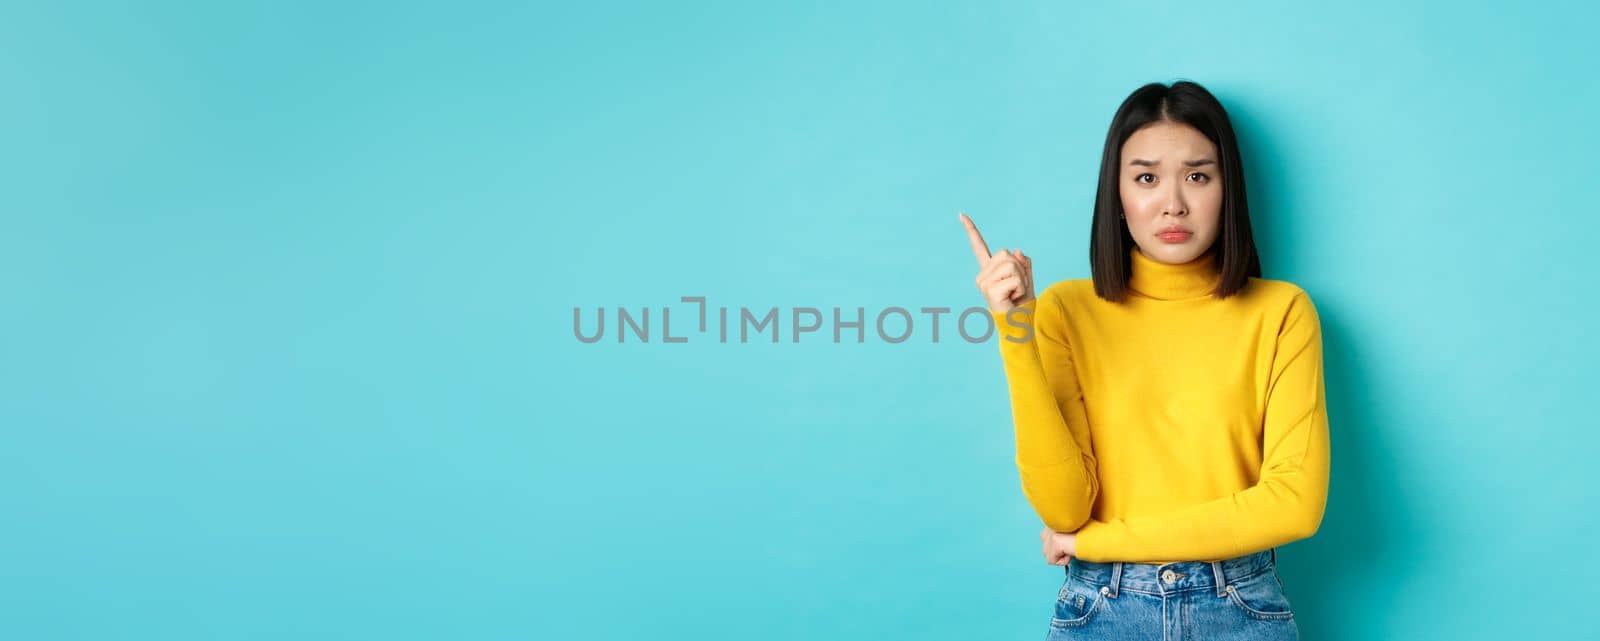 Shopping concept. Sad and gloomy asian girl in yellow sweater pointing finger left, frowning and showing bad news on copy space, standing over blue background.